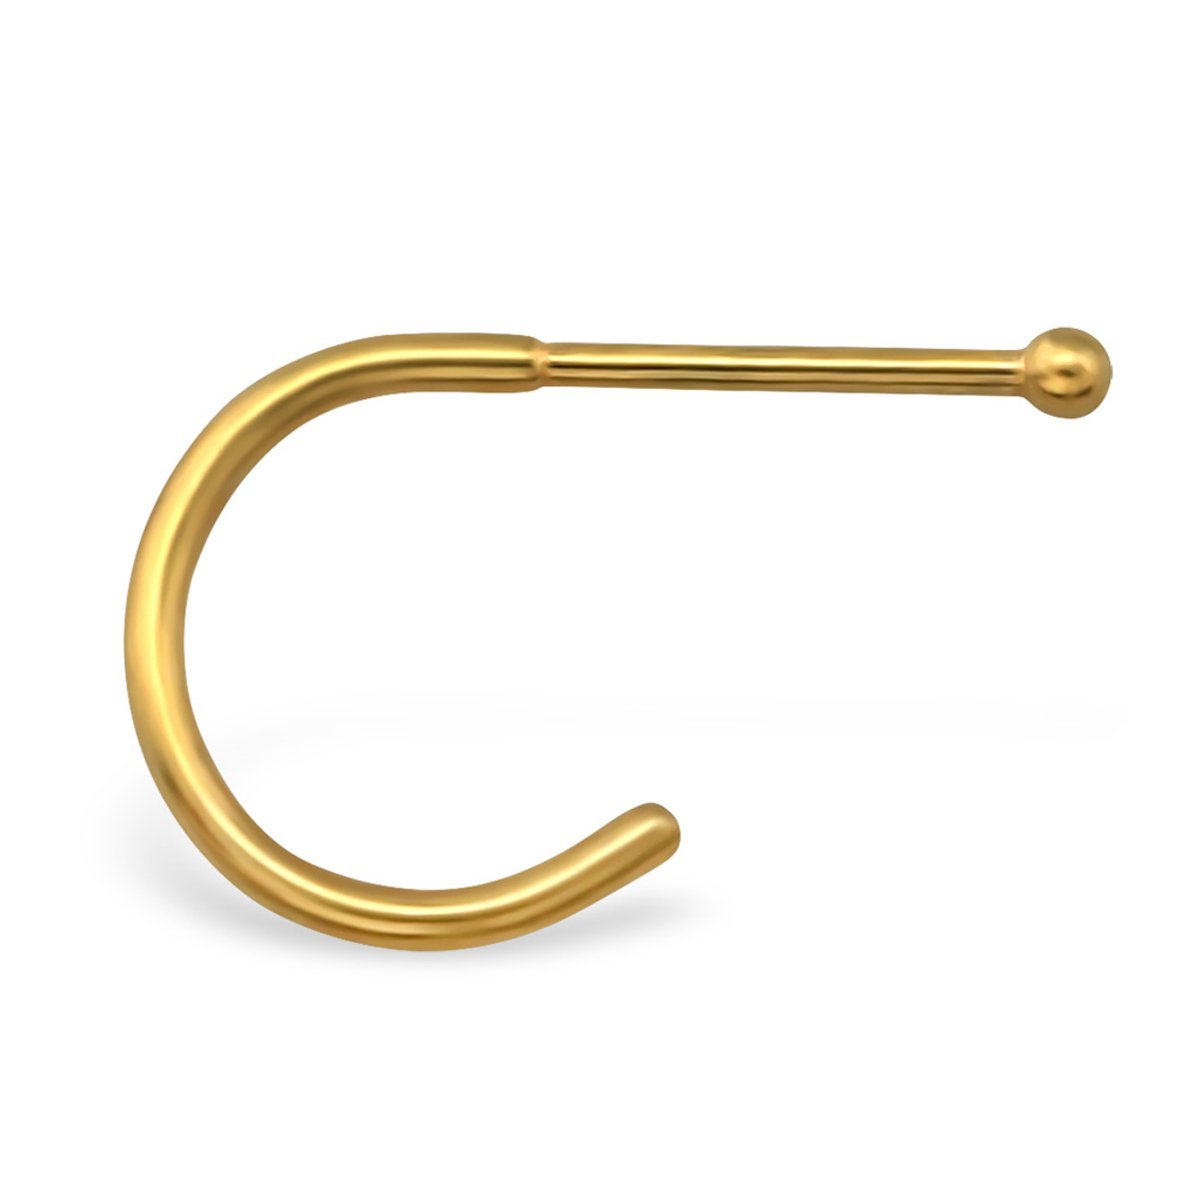 5 X Gold Surgical Steel Hoop Nose Studs